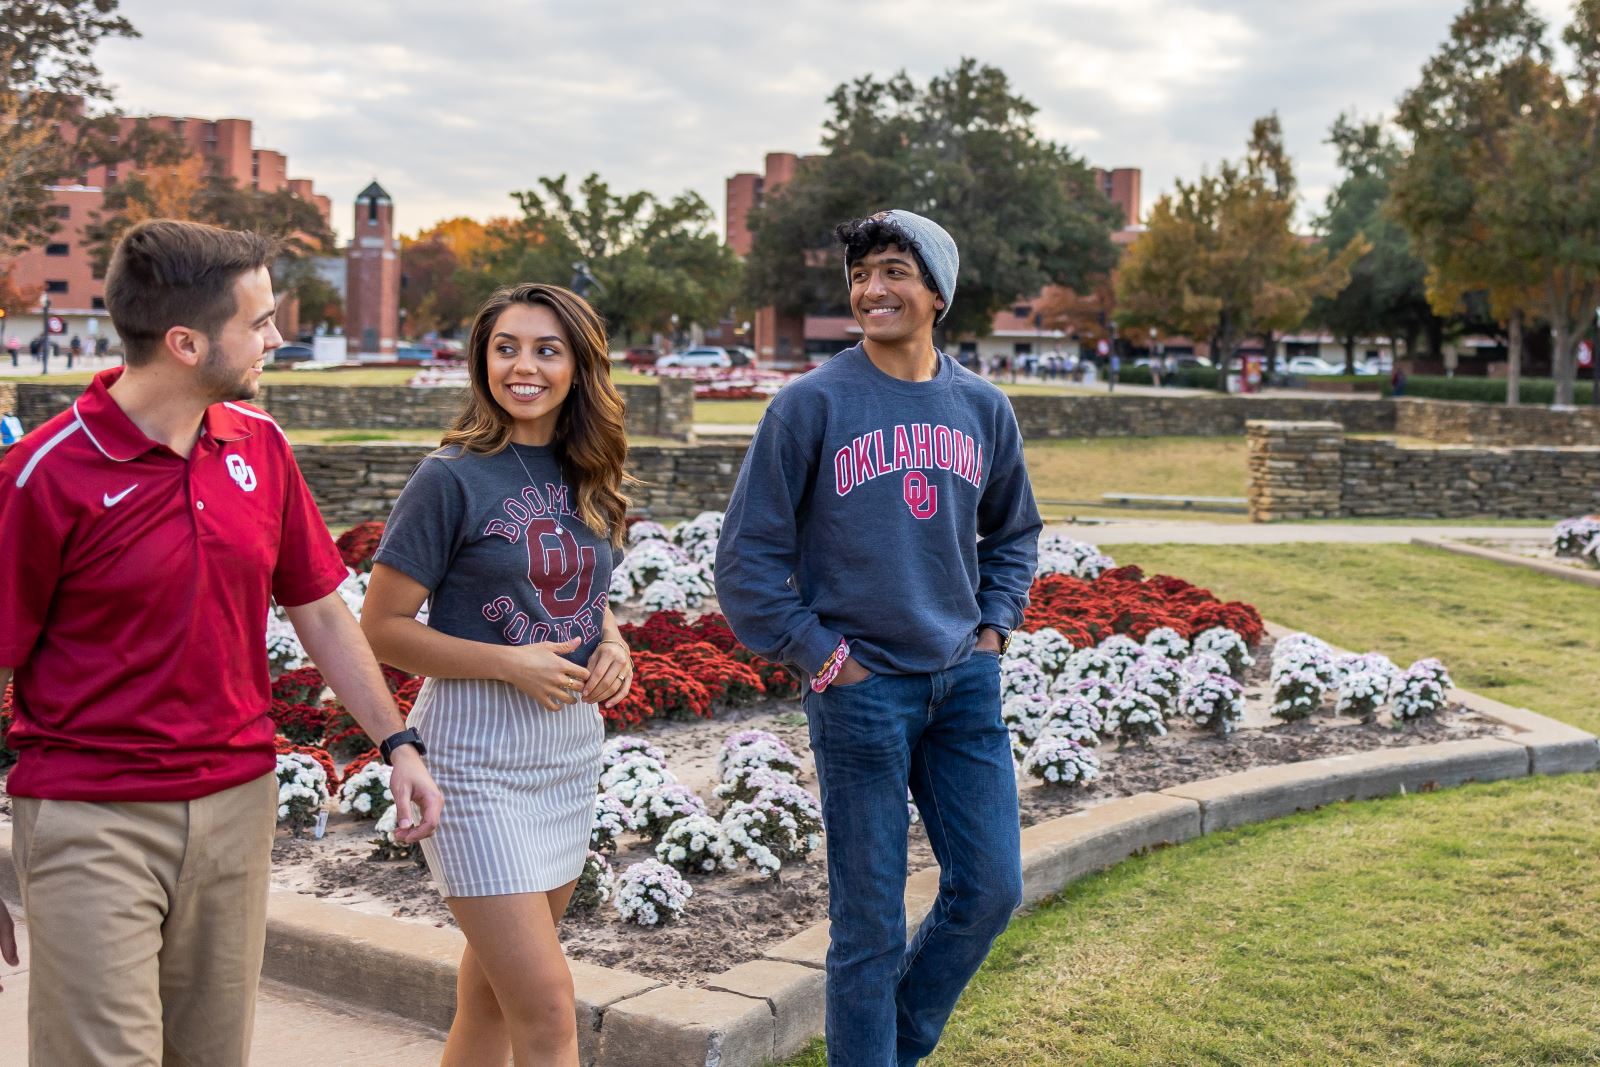 3 students walking on campus